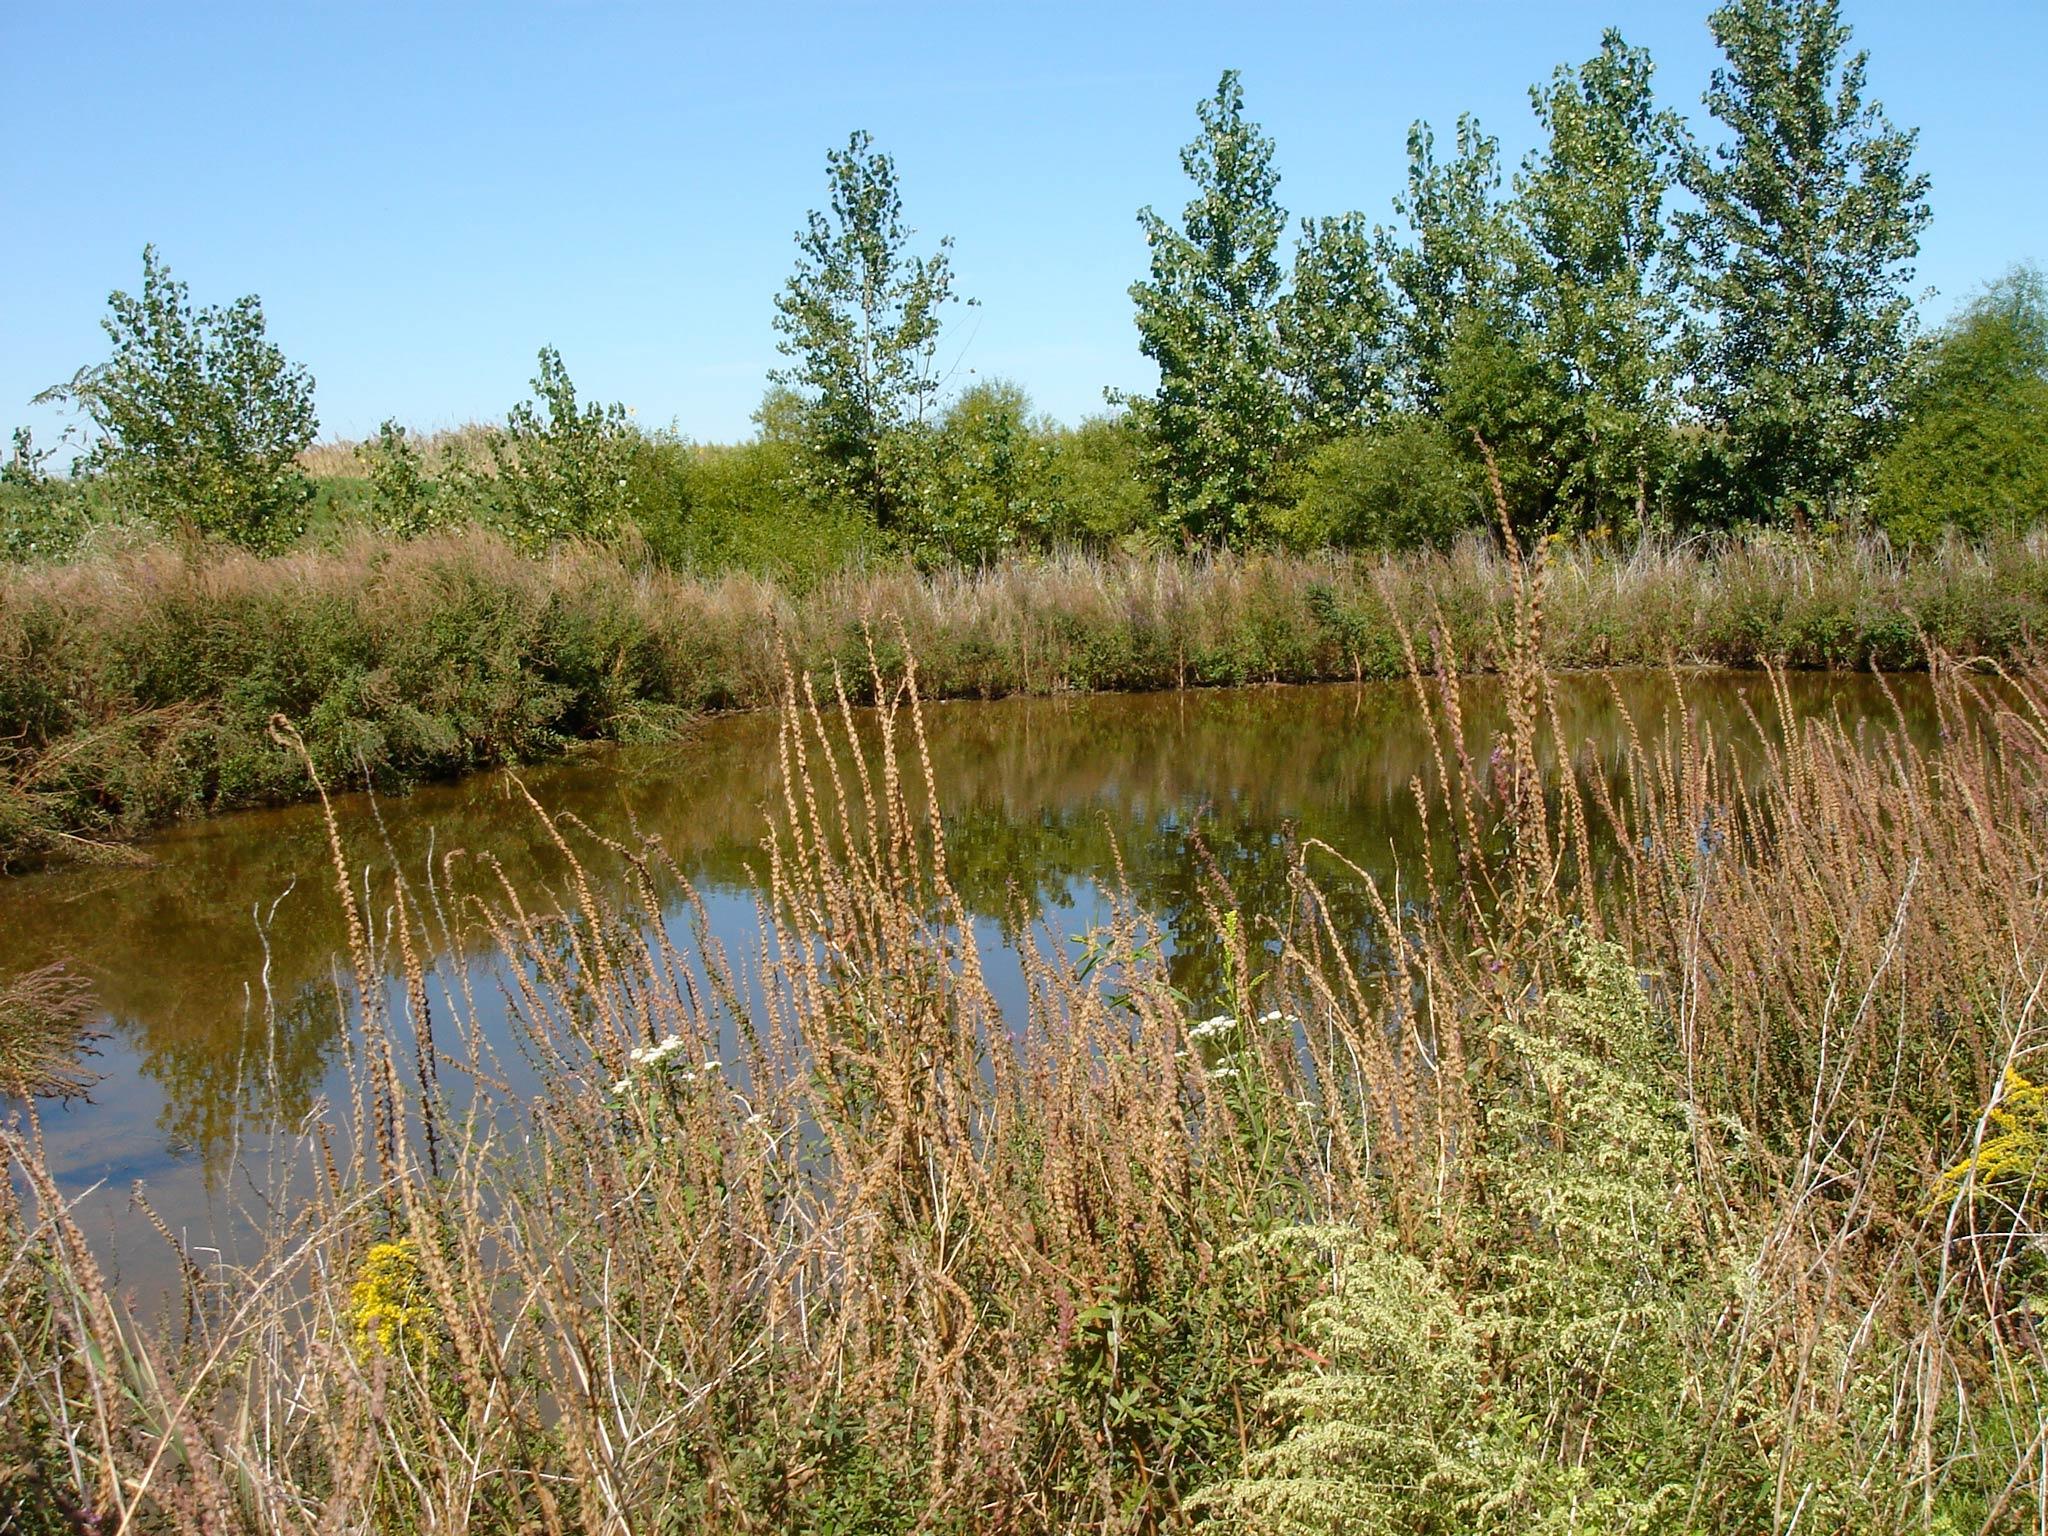 A small pond with grasses and sedges in the foreground and deciduous trees in the background.